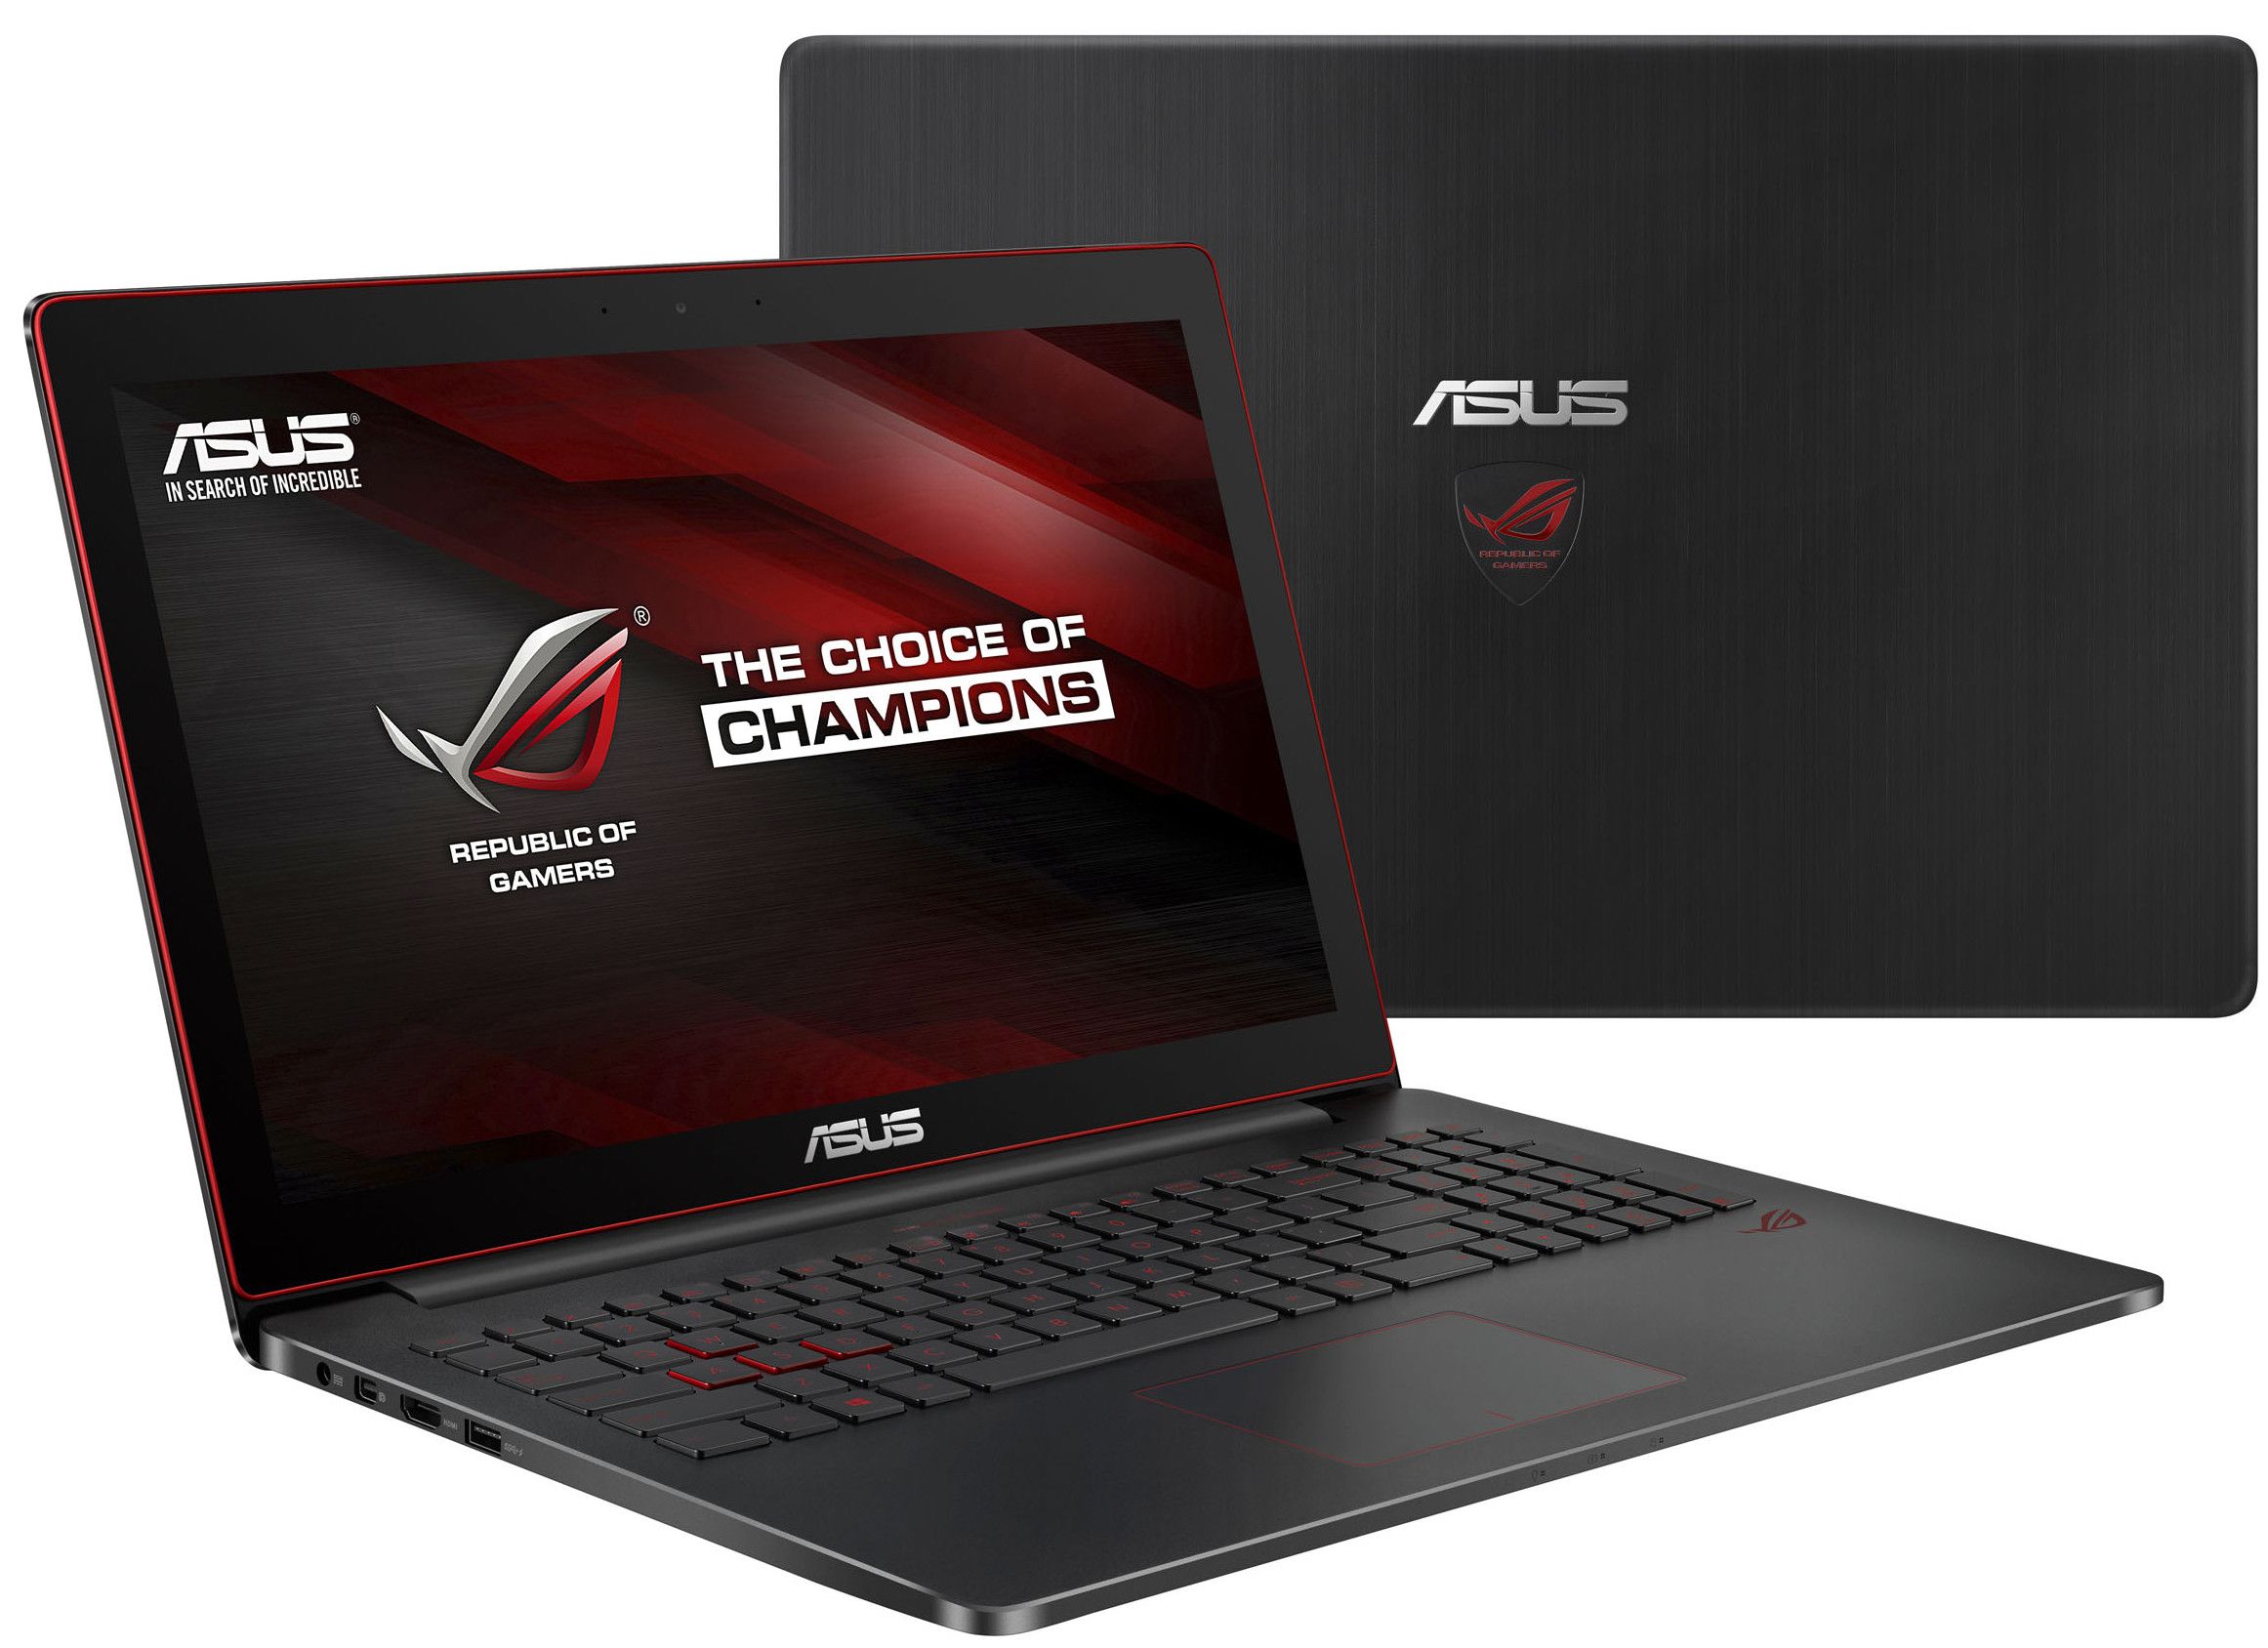 notebook gamer with 1,400 MB / s SSD storage and GeForce GTX 960M GPU